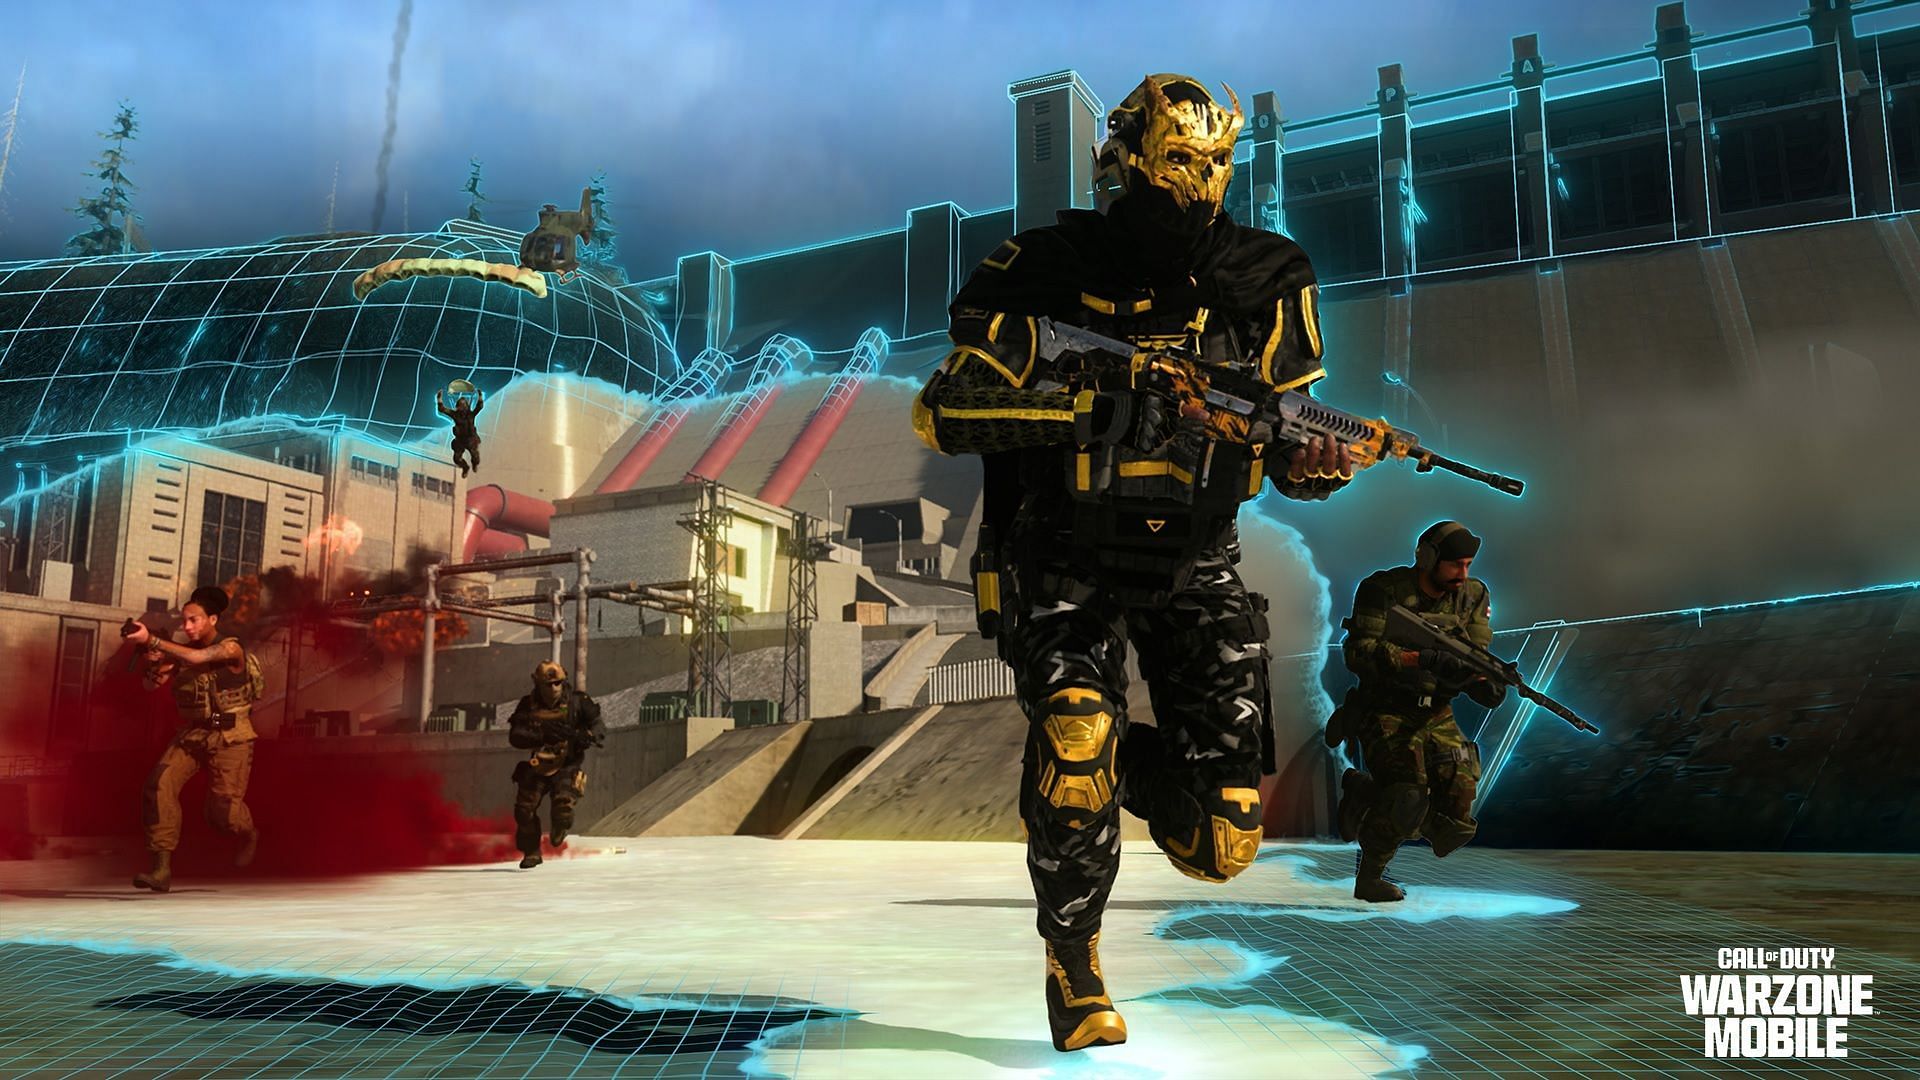 How to earn Event Points to unlock Ghost Golden Phantom Operator in Warzone Mobile